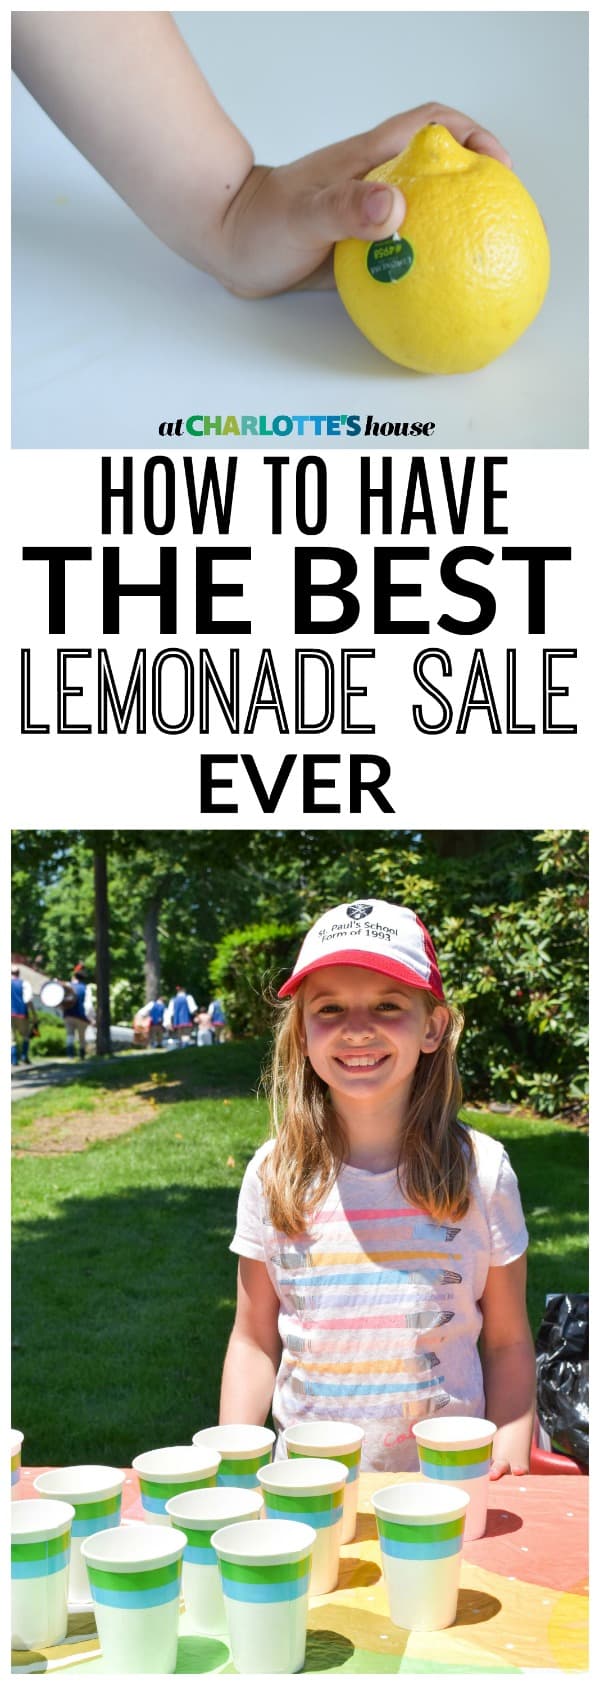 tips for hosting the best, most fun, most profitable lemonade sale ever.